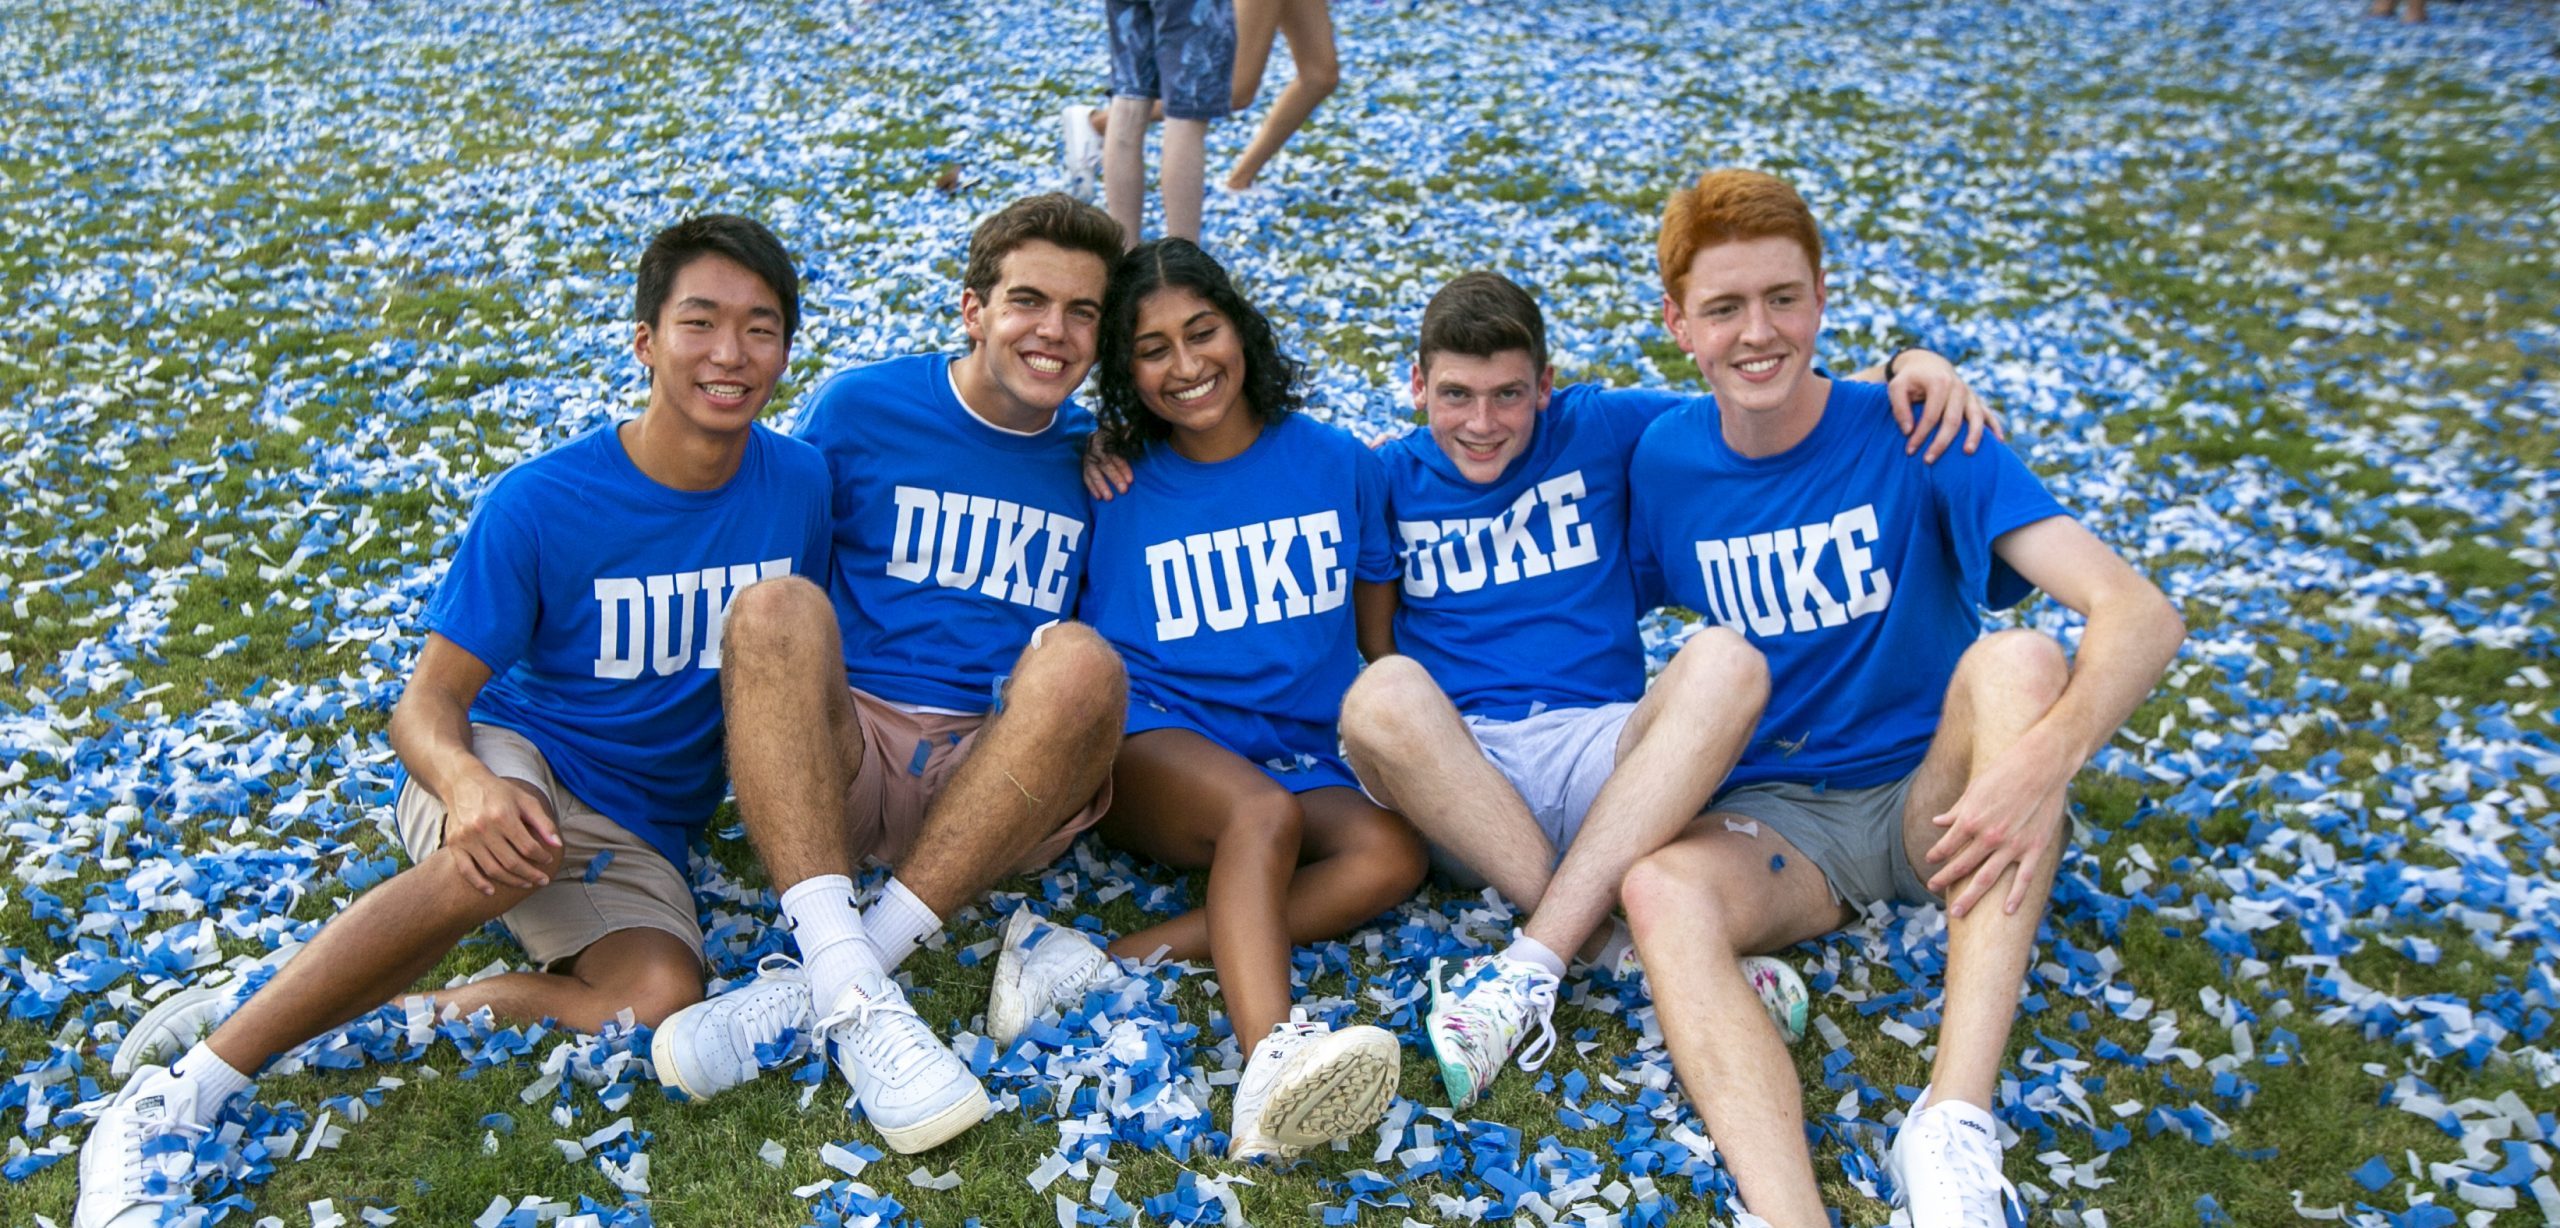 students sit in confetti with blue duke tshirts on